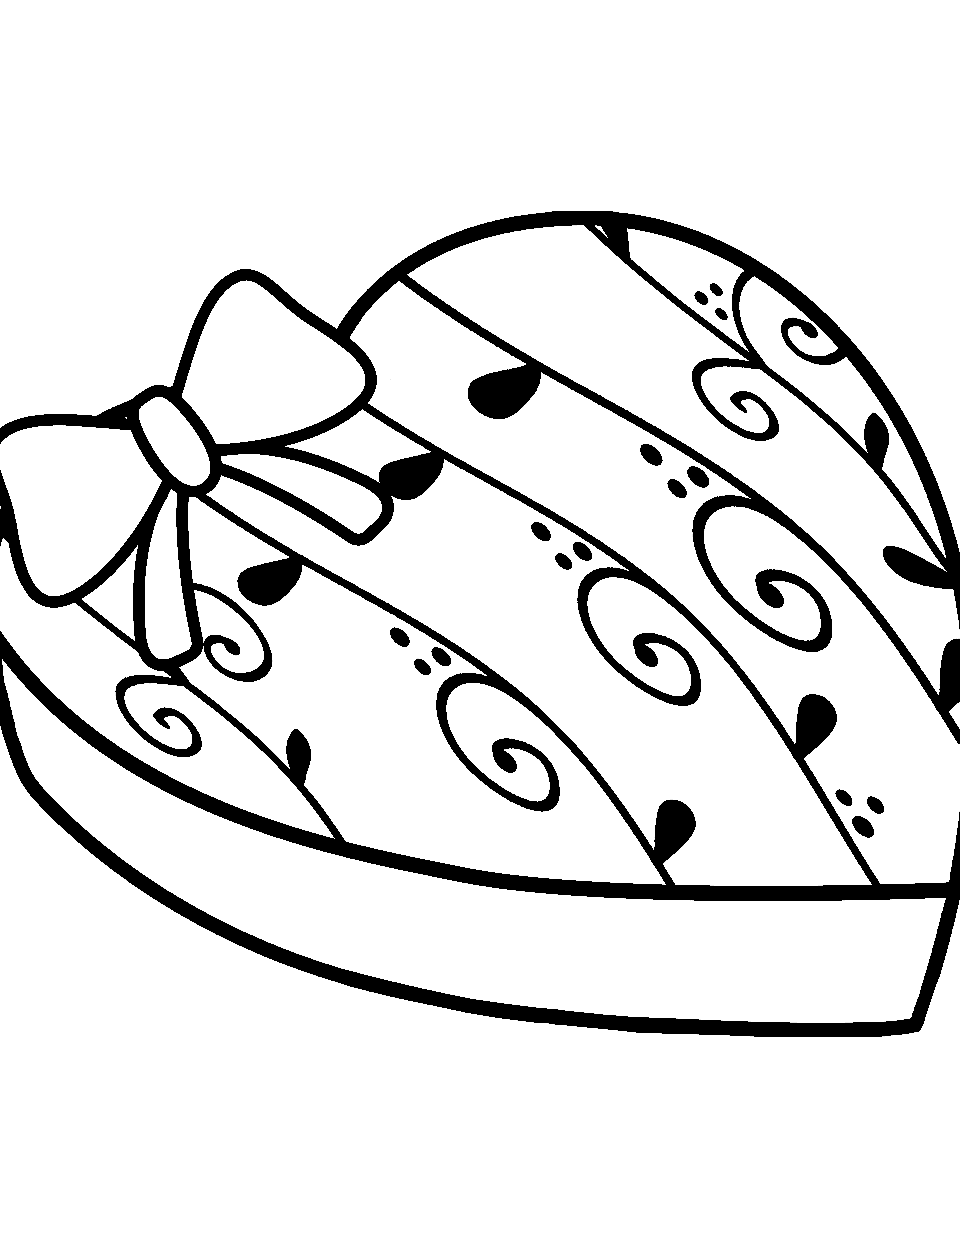 Chocolate Heart Box Coloring Page - A heart-shaped chocolate box with a beautiful design on top.